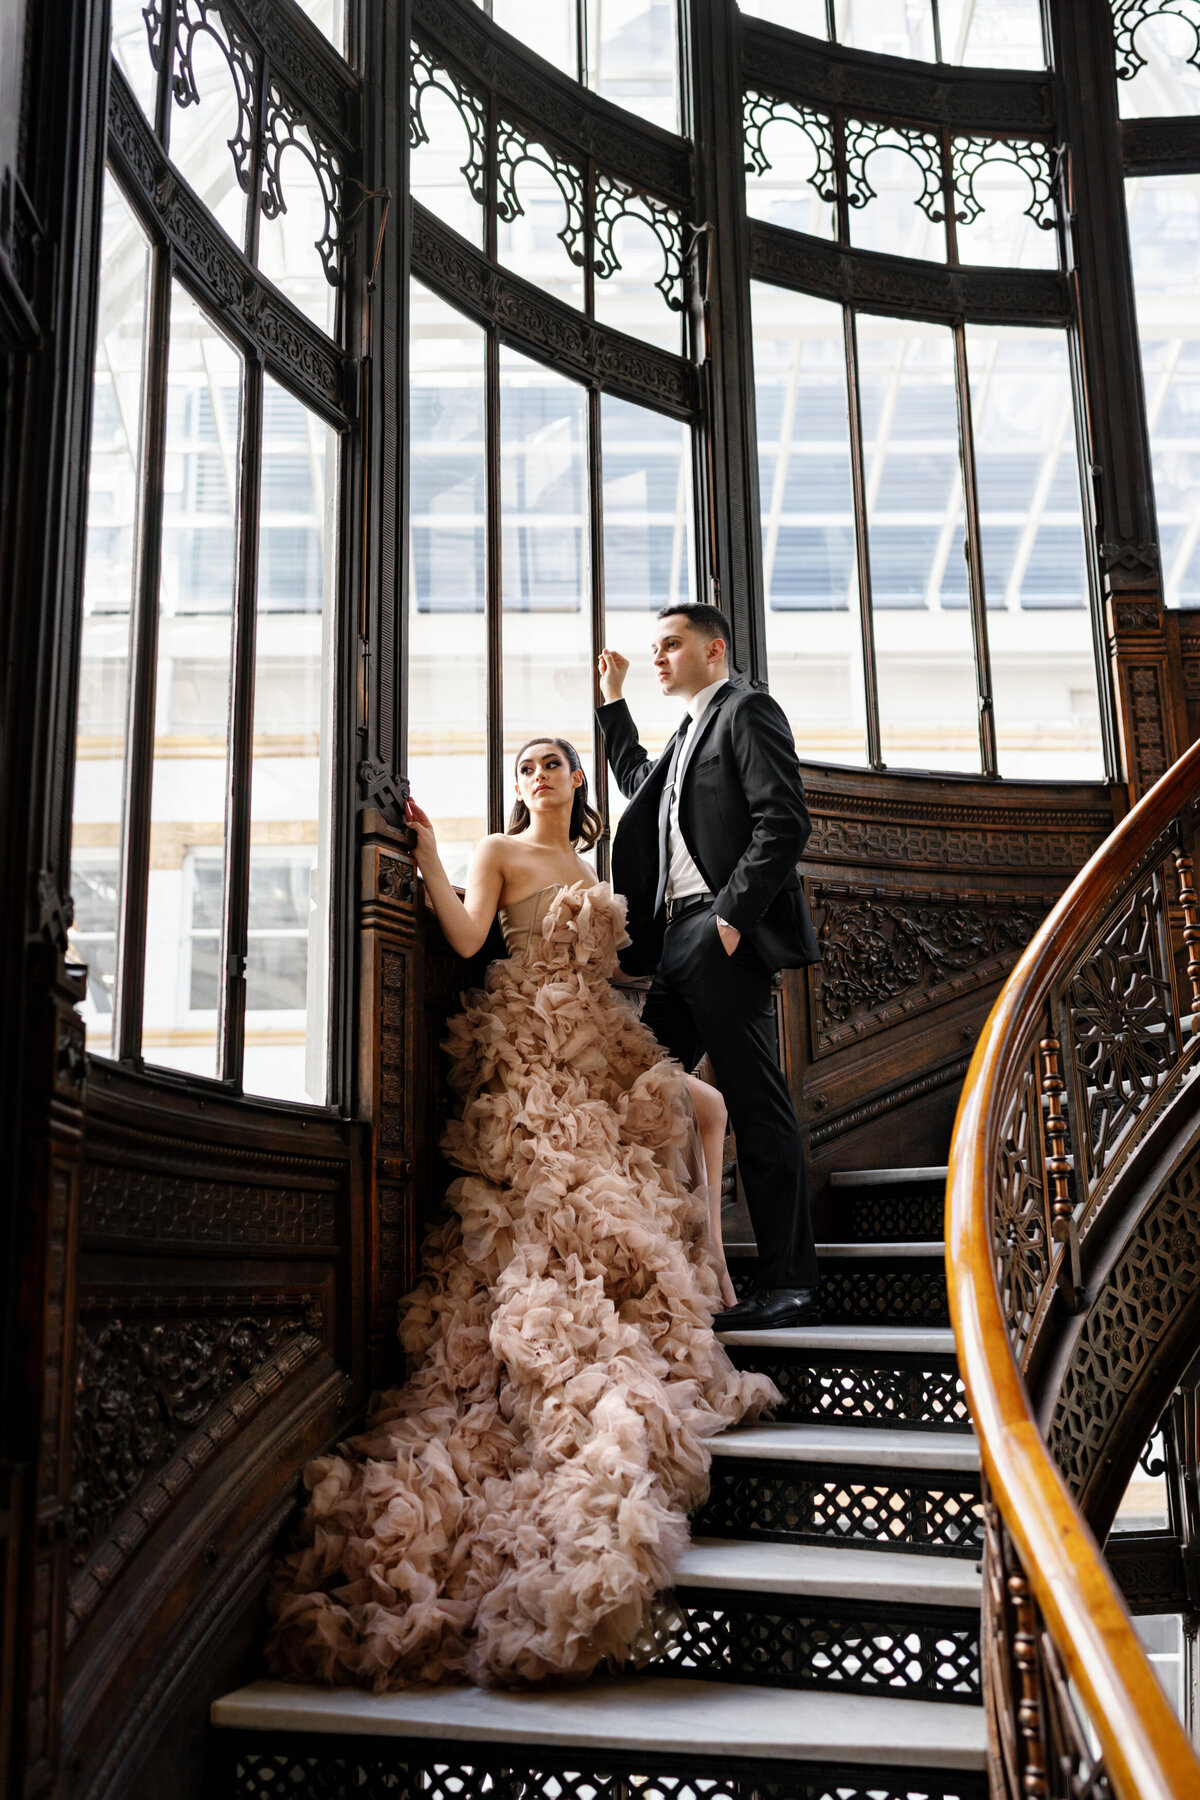 Aspen-Avenue-Chicago-Wedding-Photographer-Rookery-Engagement-Session-Histoircal-Stairs-Moody-Dramatic-Magazine-Unique-Gown-Stemming-From-Love-Emily-Rae-Bridal-Hair-FAV-11